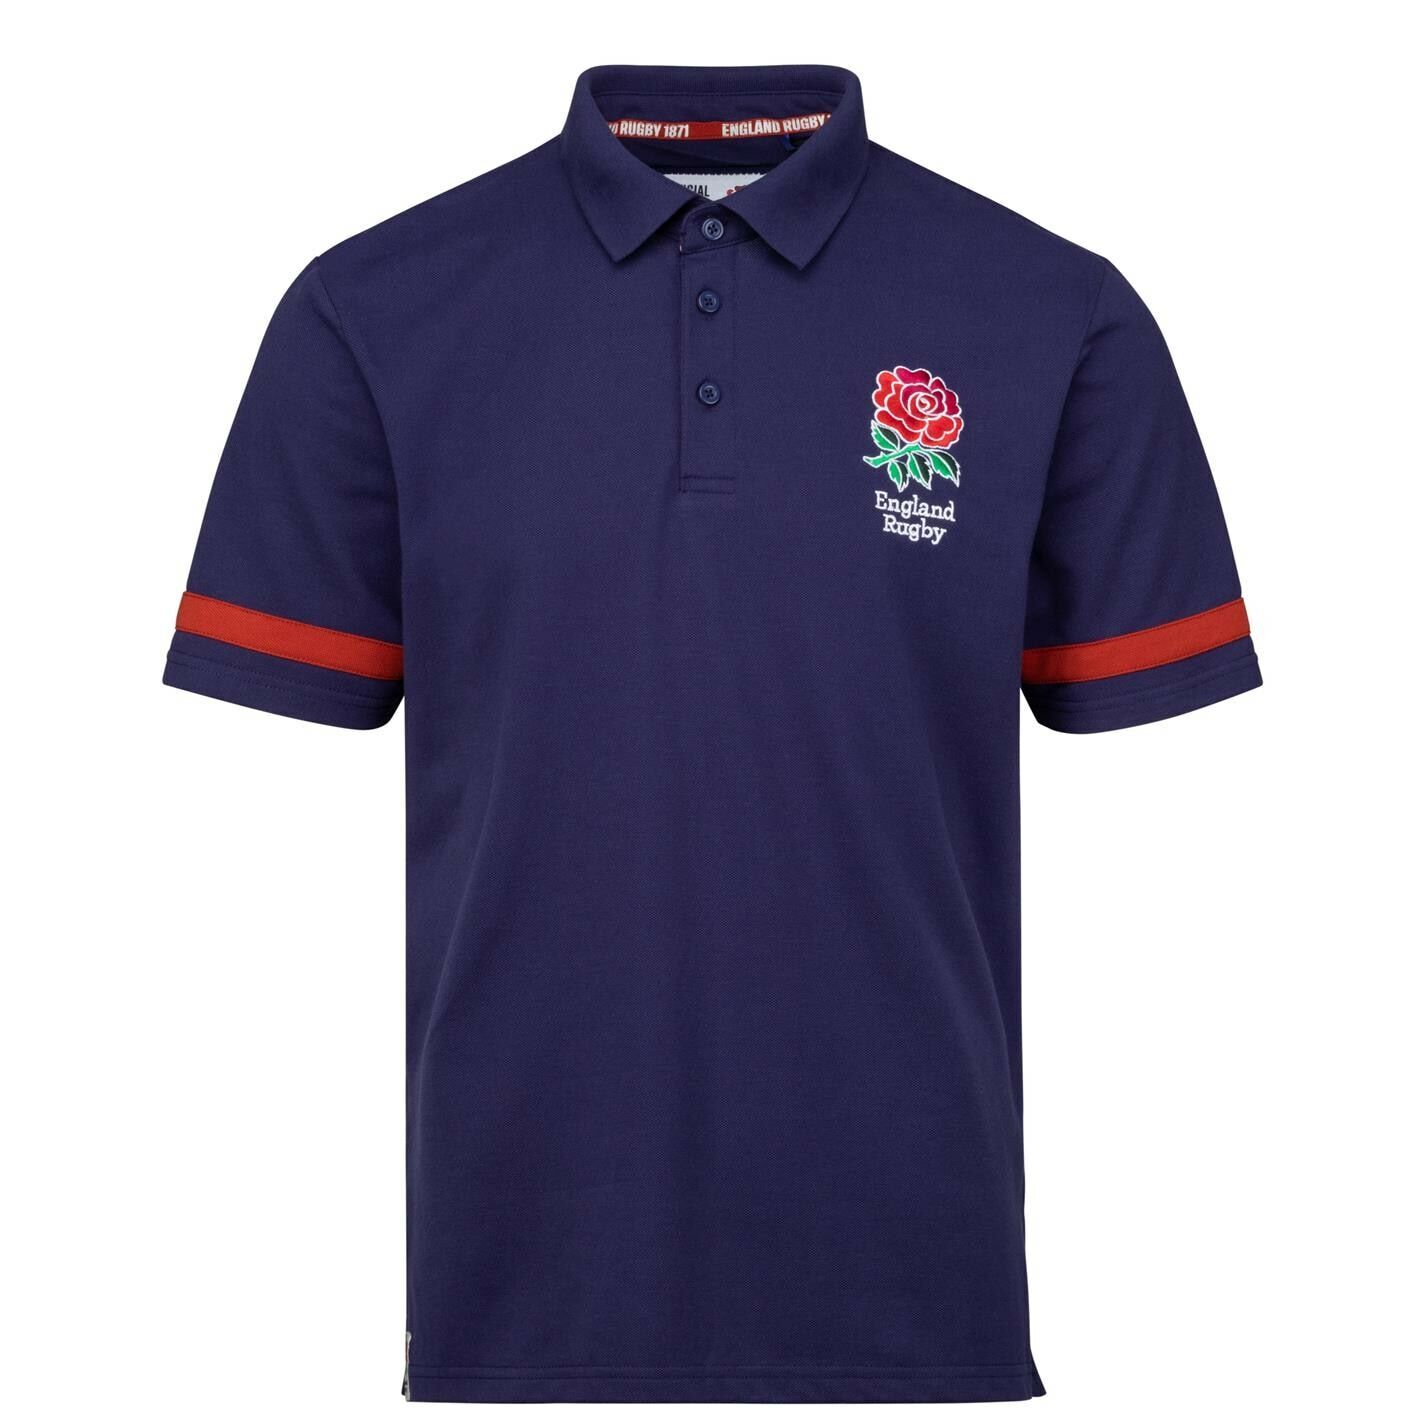 England Rugby Mens Polo Shirt